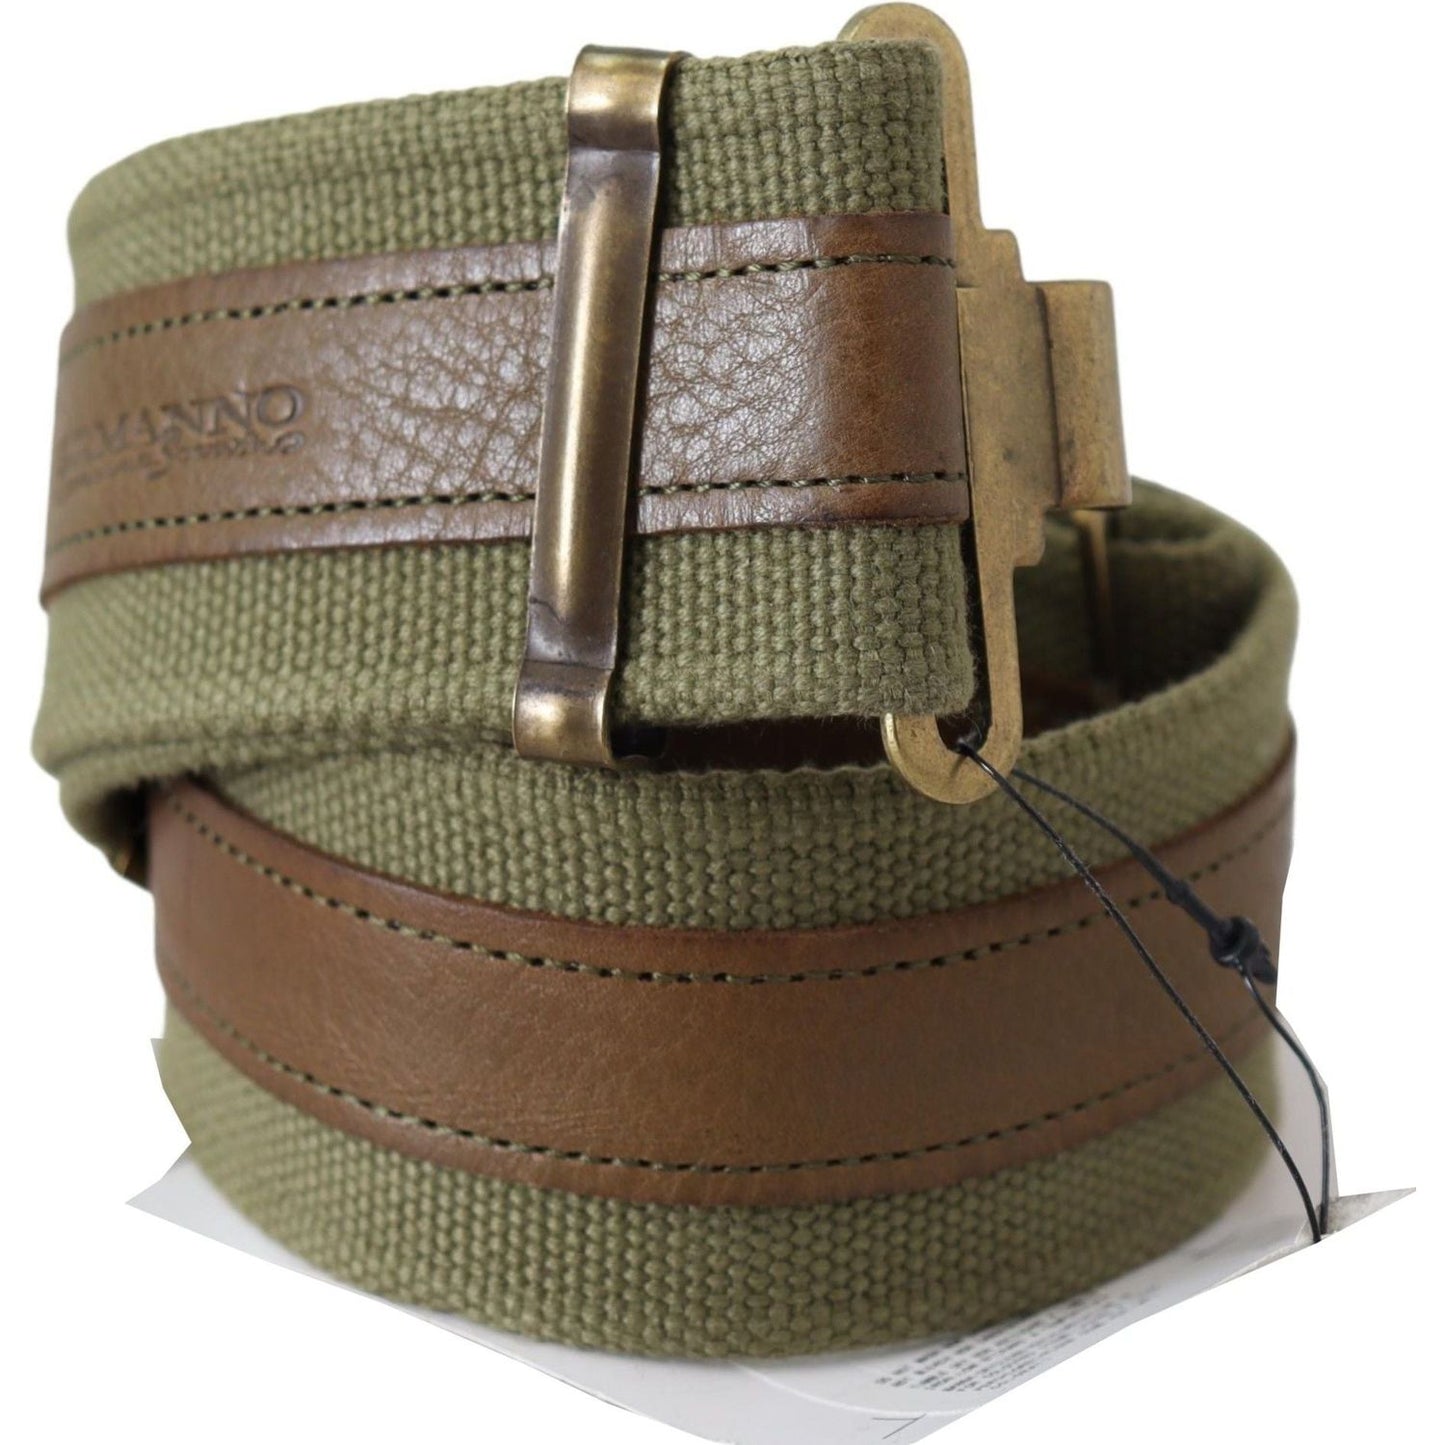 Ermanno Scervino Chic Army Green Rustic Belt Belt green-leather-rustic-bronze-buckle-army-belt IMG_0656-ed6f9351-dc2.jpg